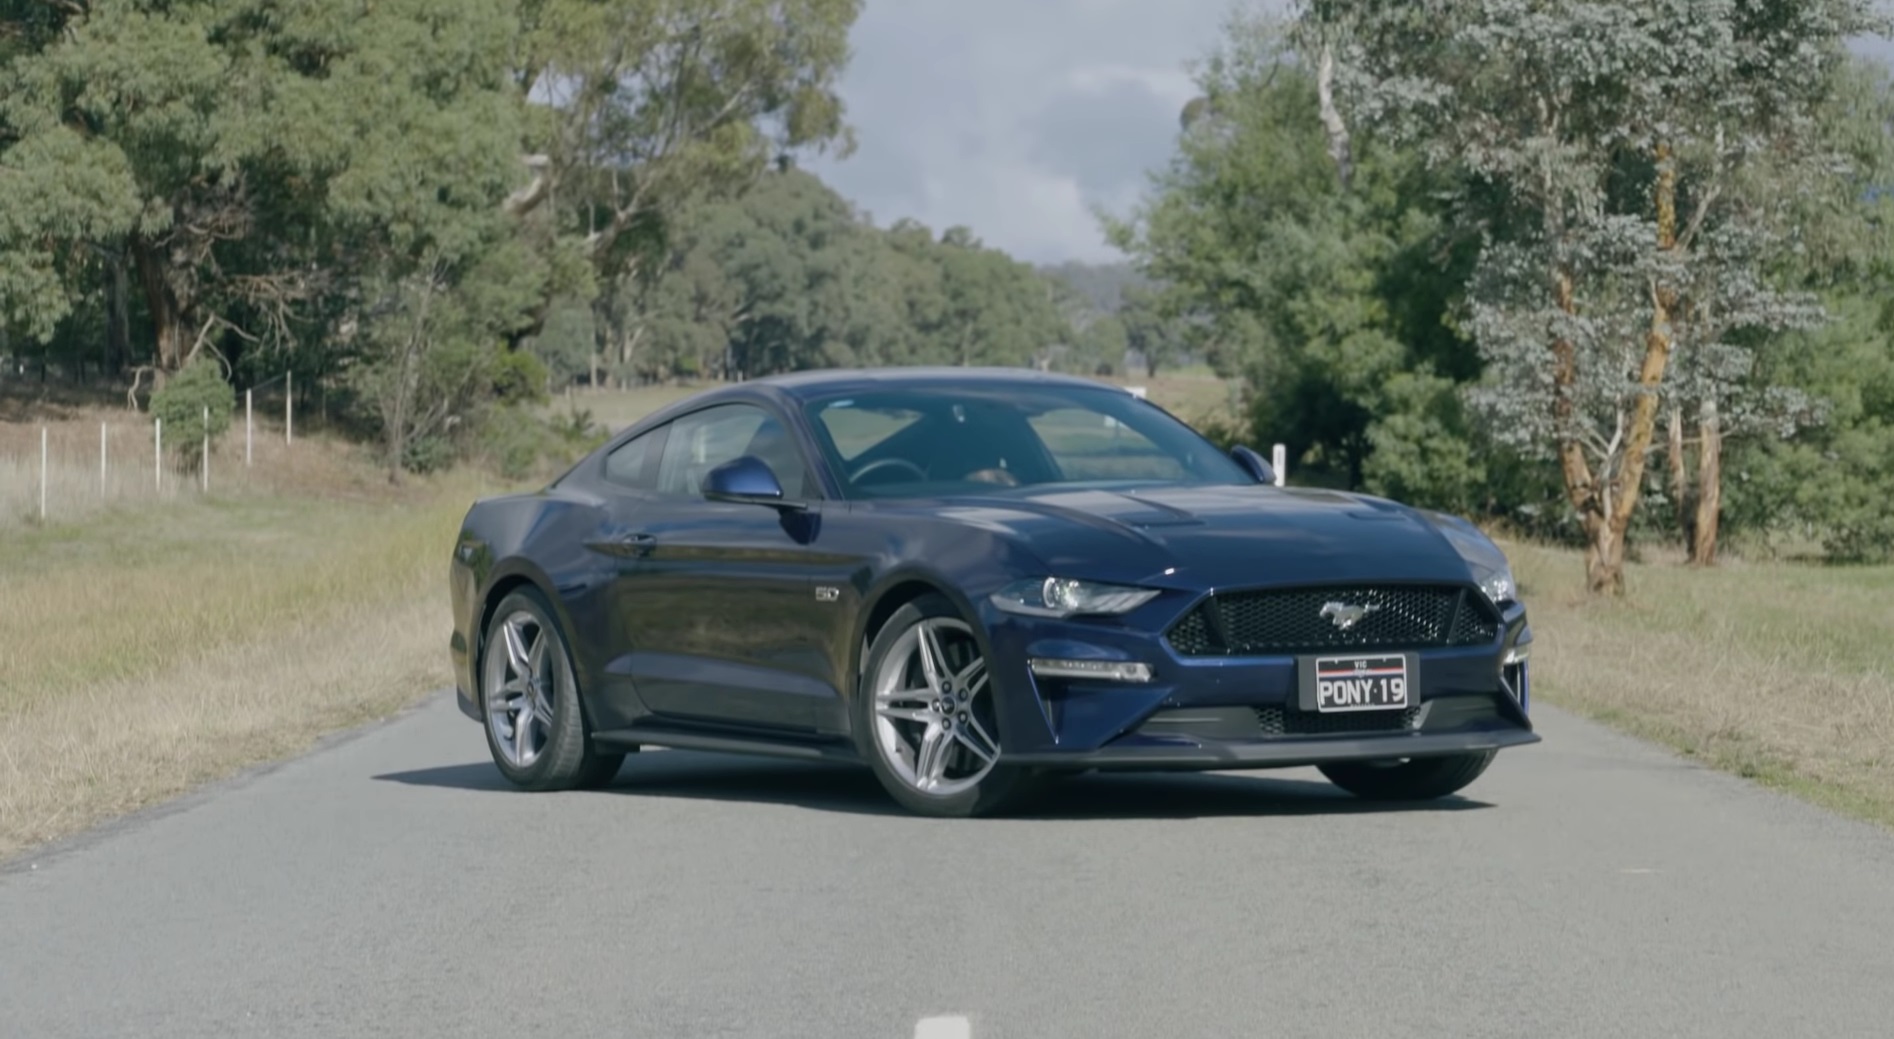 Video: 2018 Ford Mustang Review - A Better Muscle Car